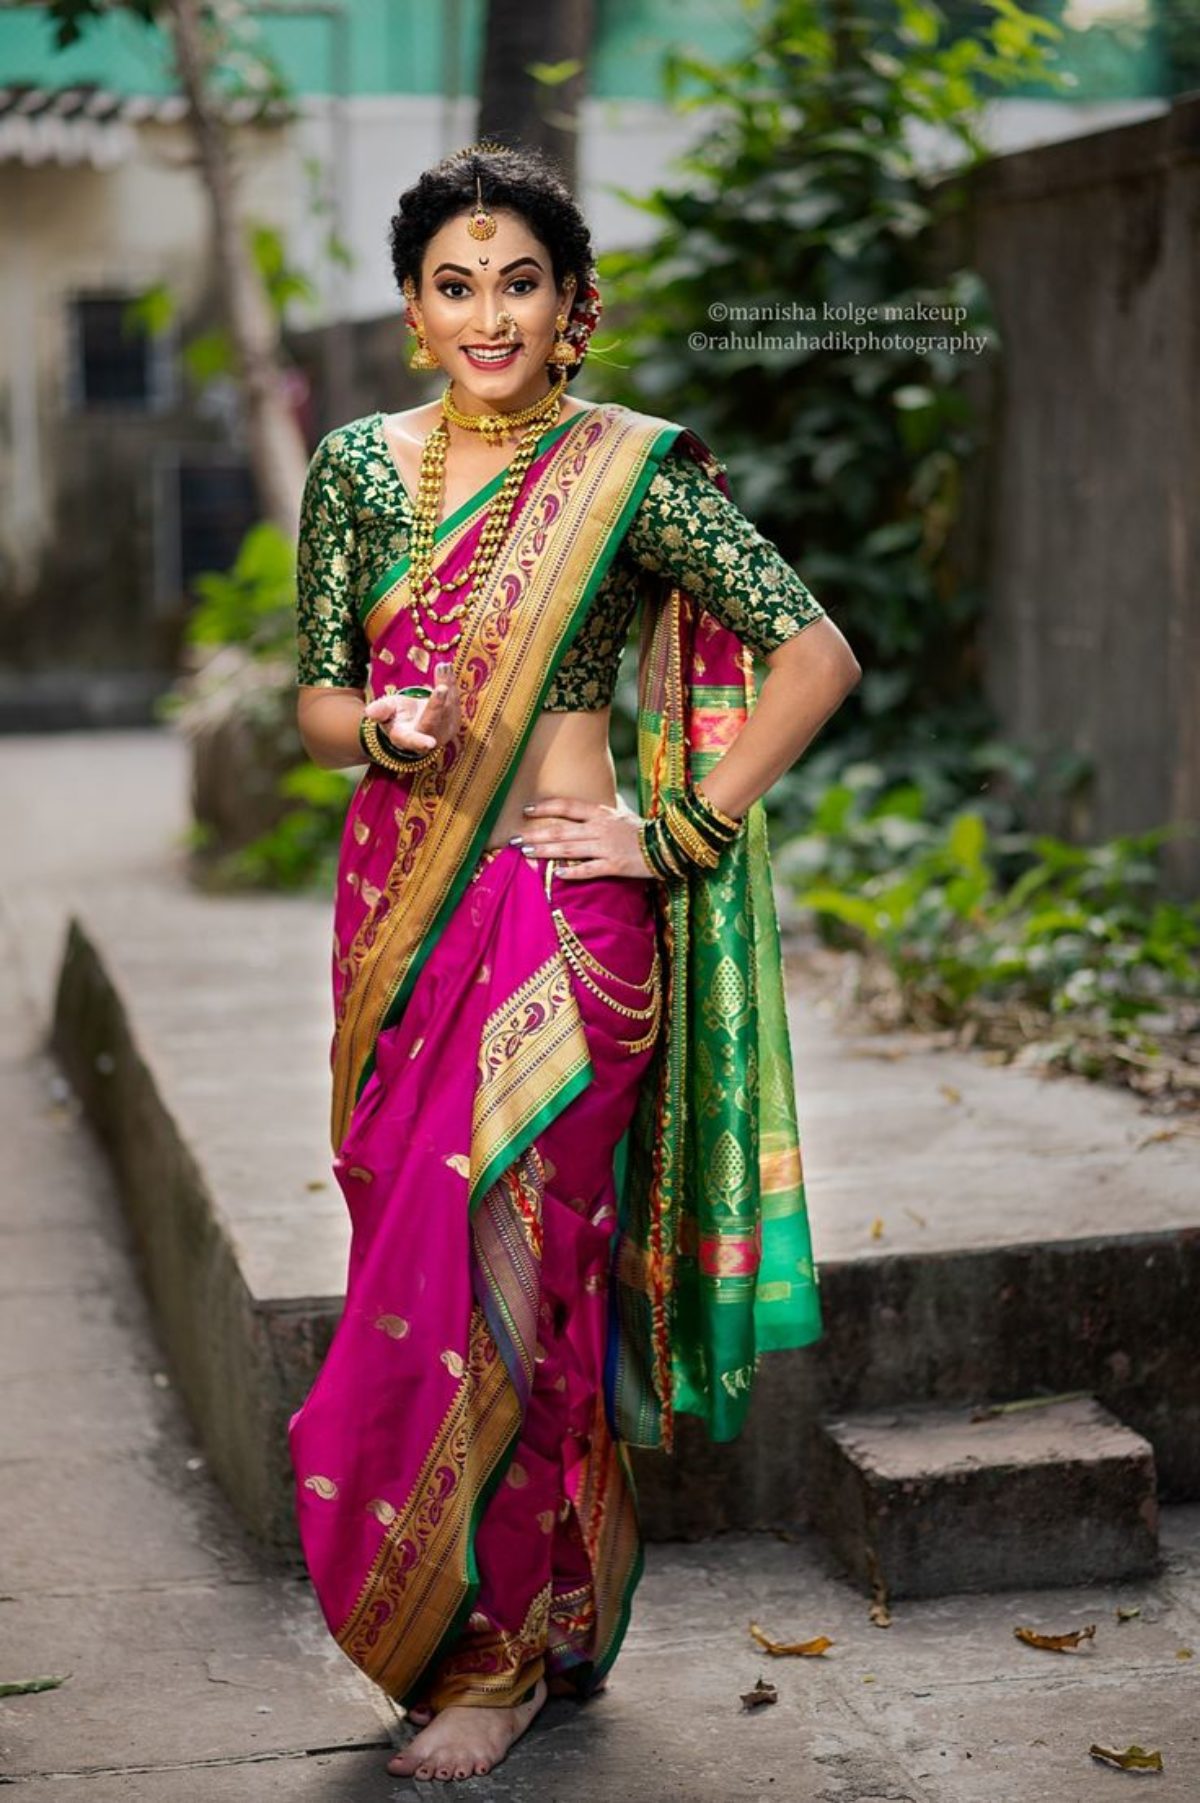 TYPES OF NAUVARI SAREE FOR A TRADITIONAL LOOK!